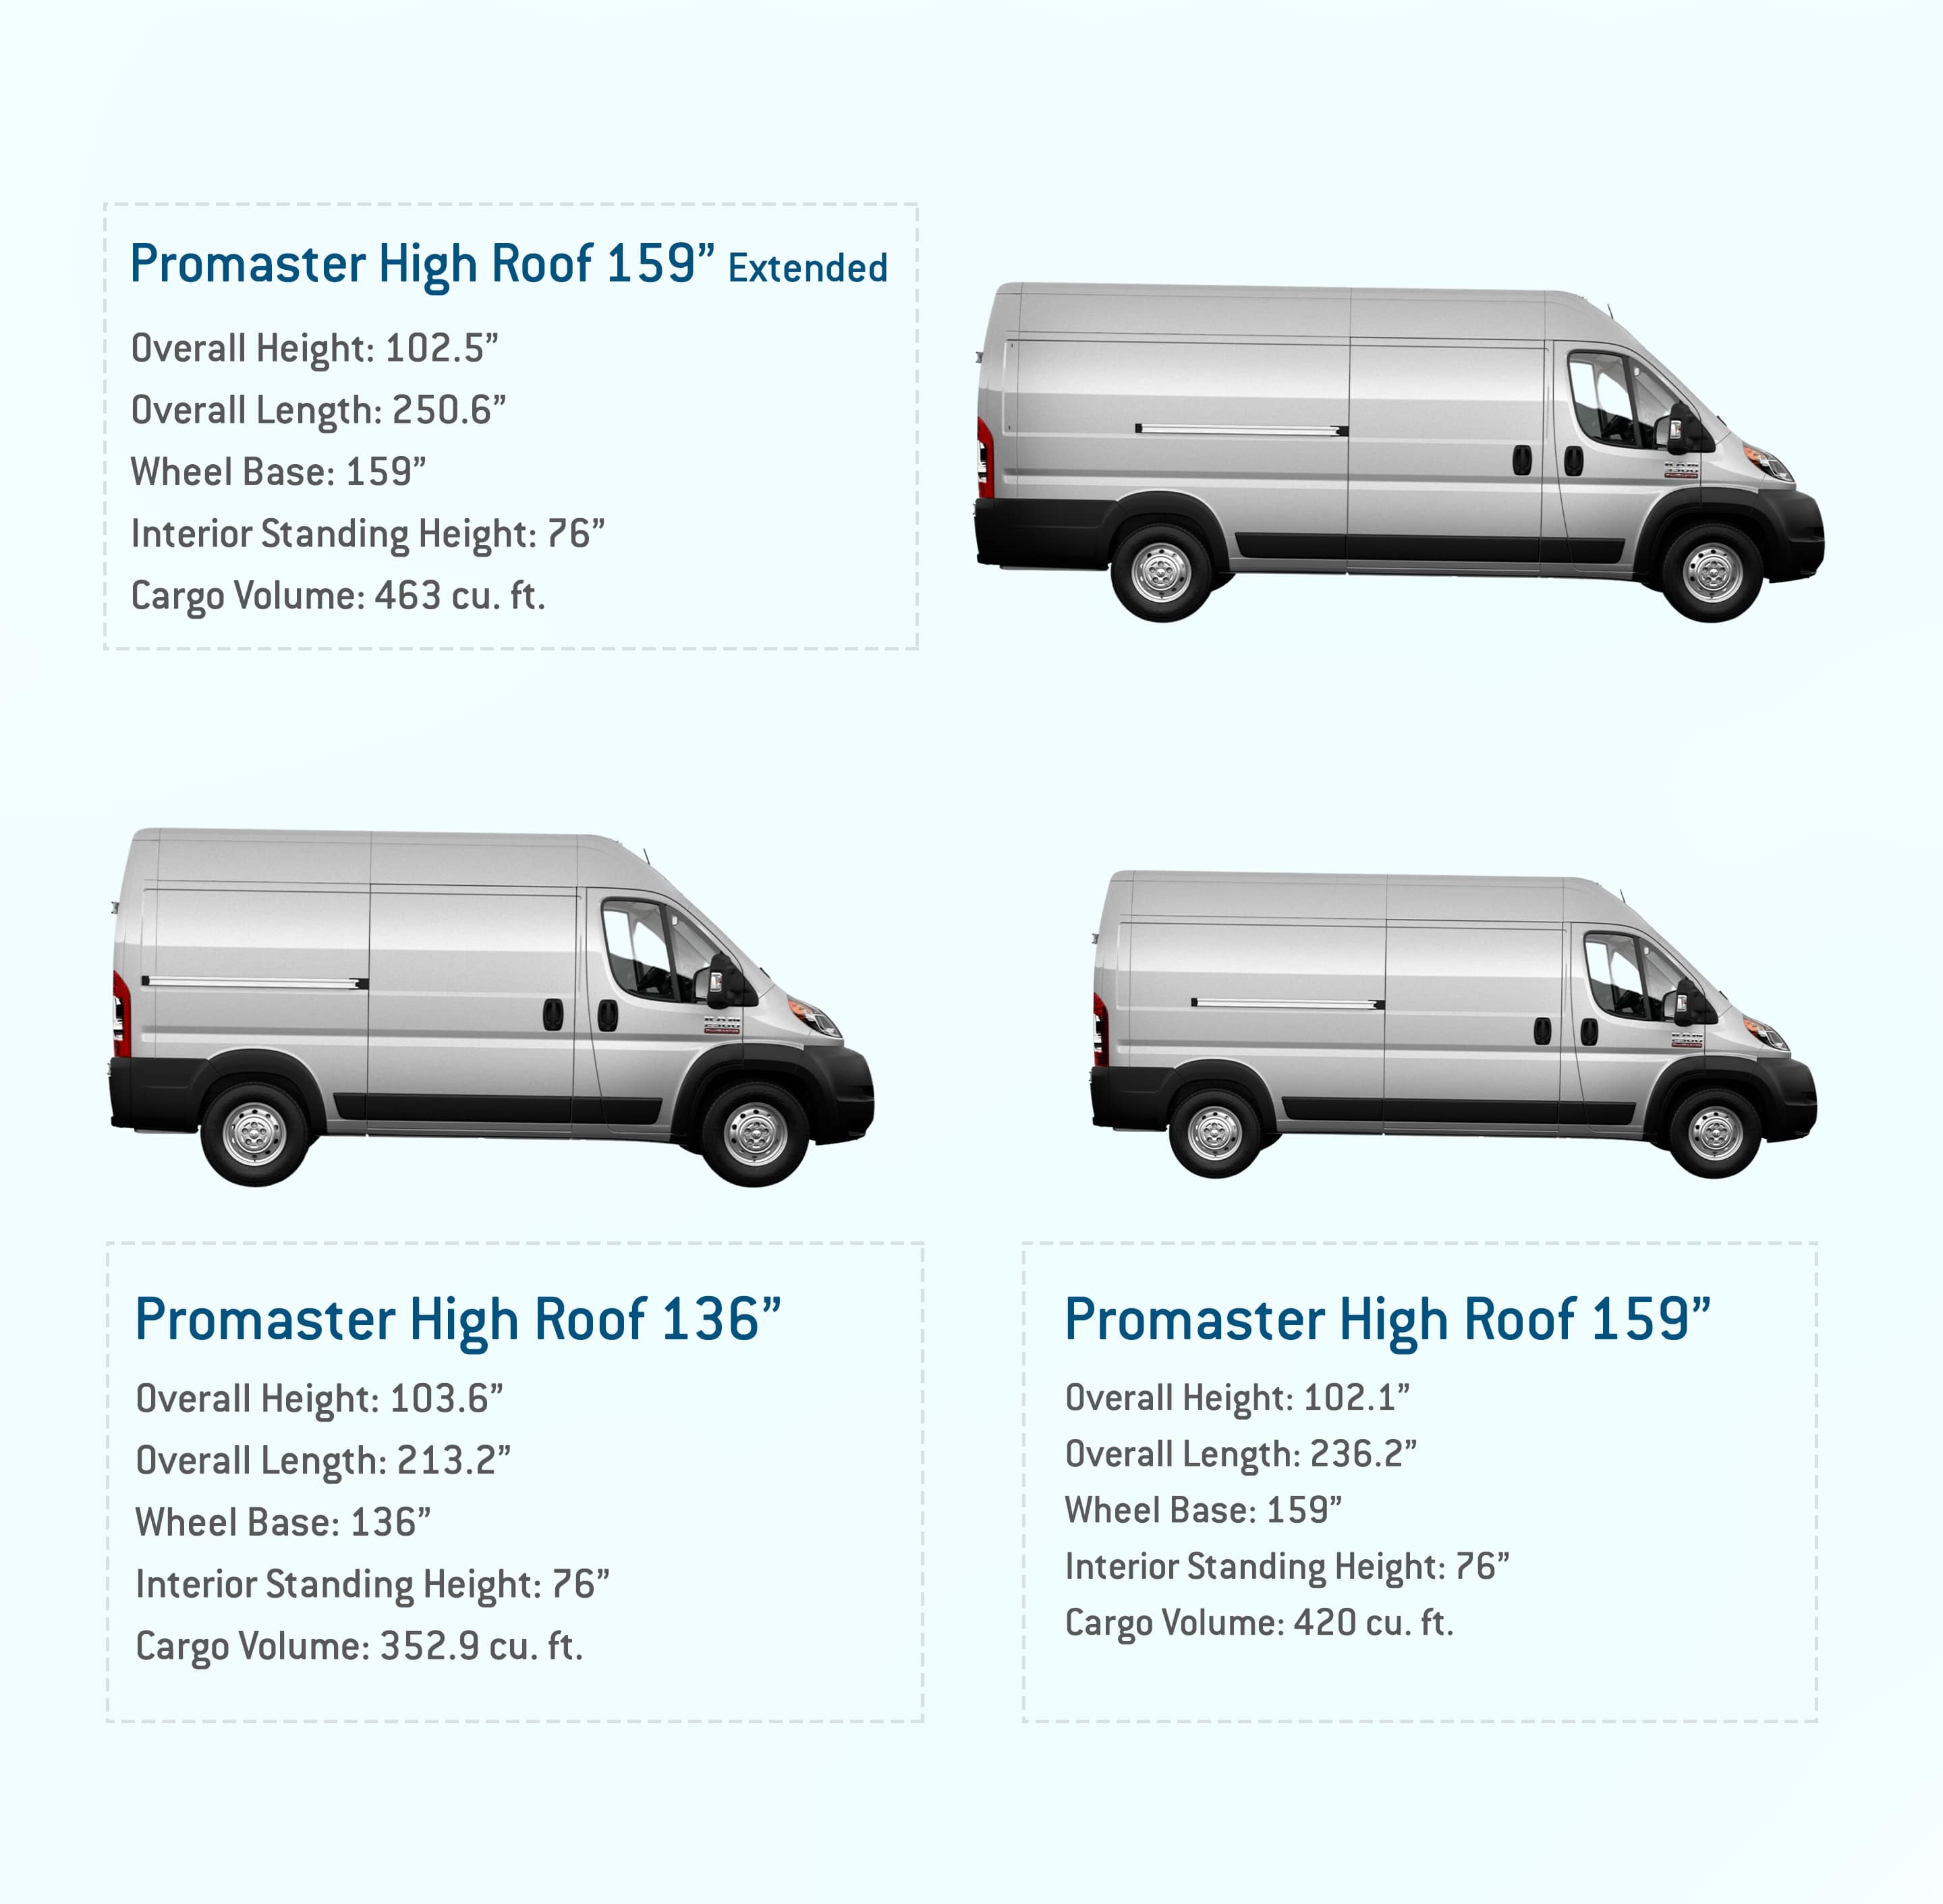 Sprinter vs. Transit vs. Promaster Which one is the best?